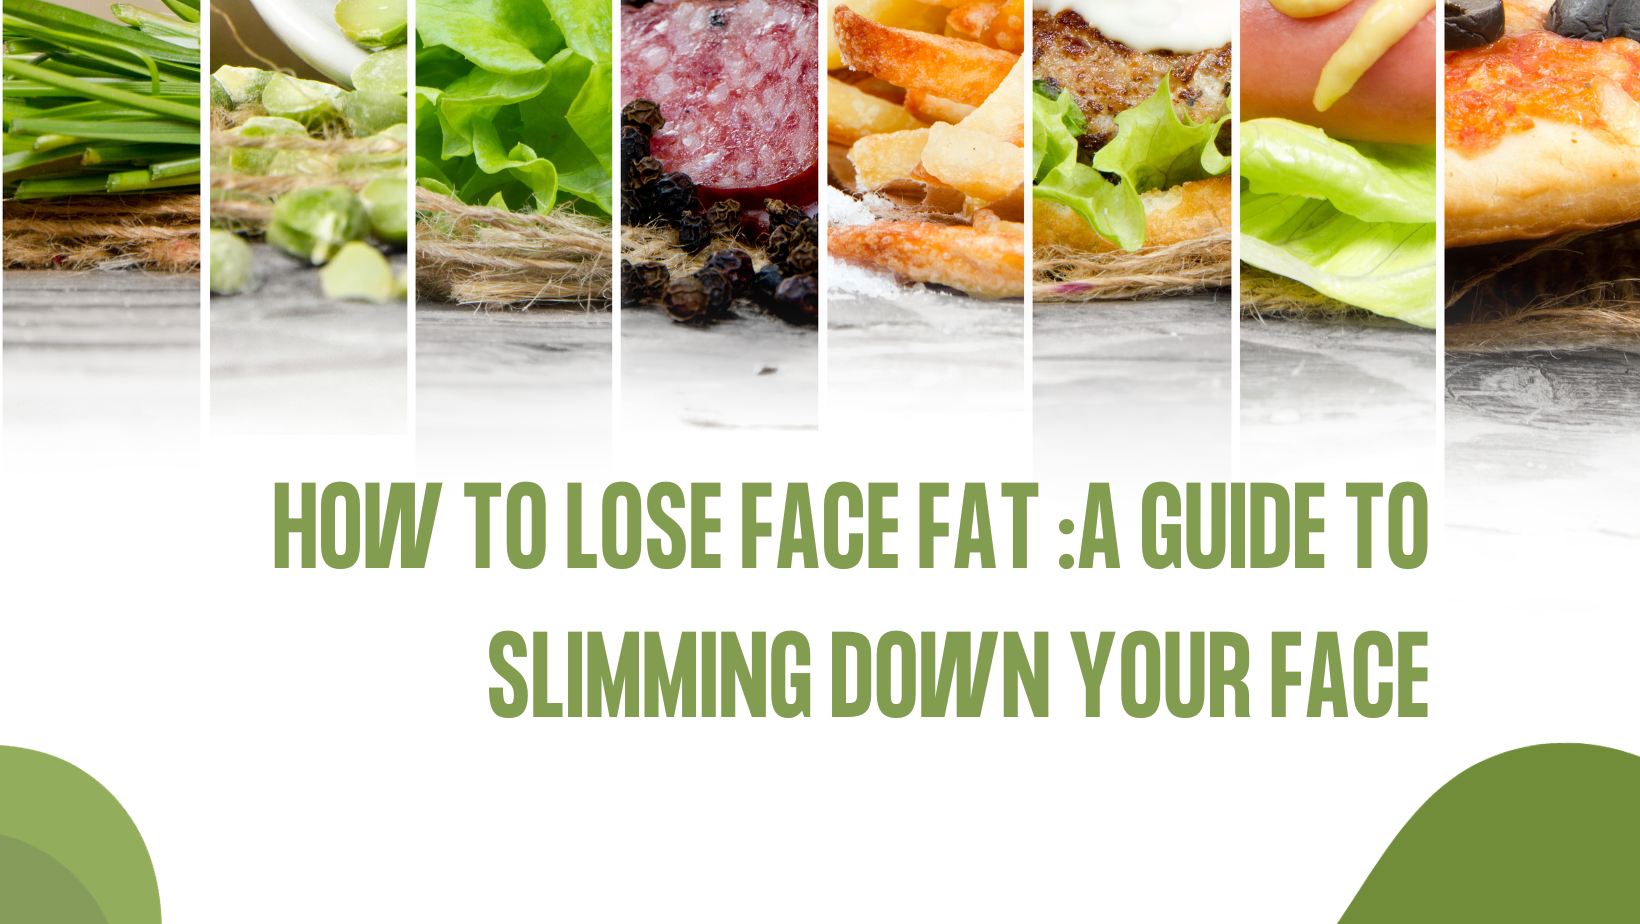 How to lose Face Fat A Guide to Slimming Down Your Face